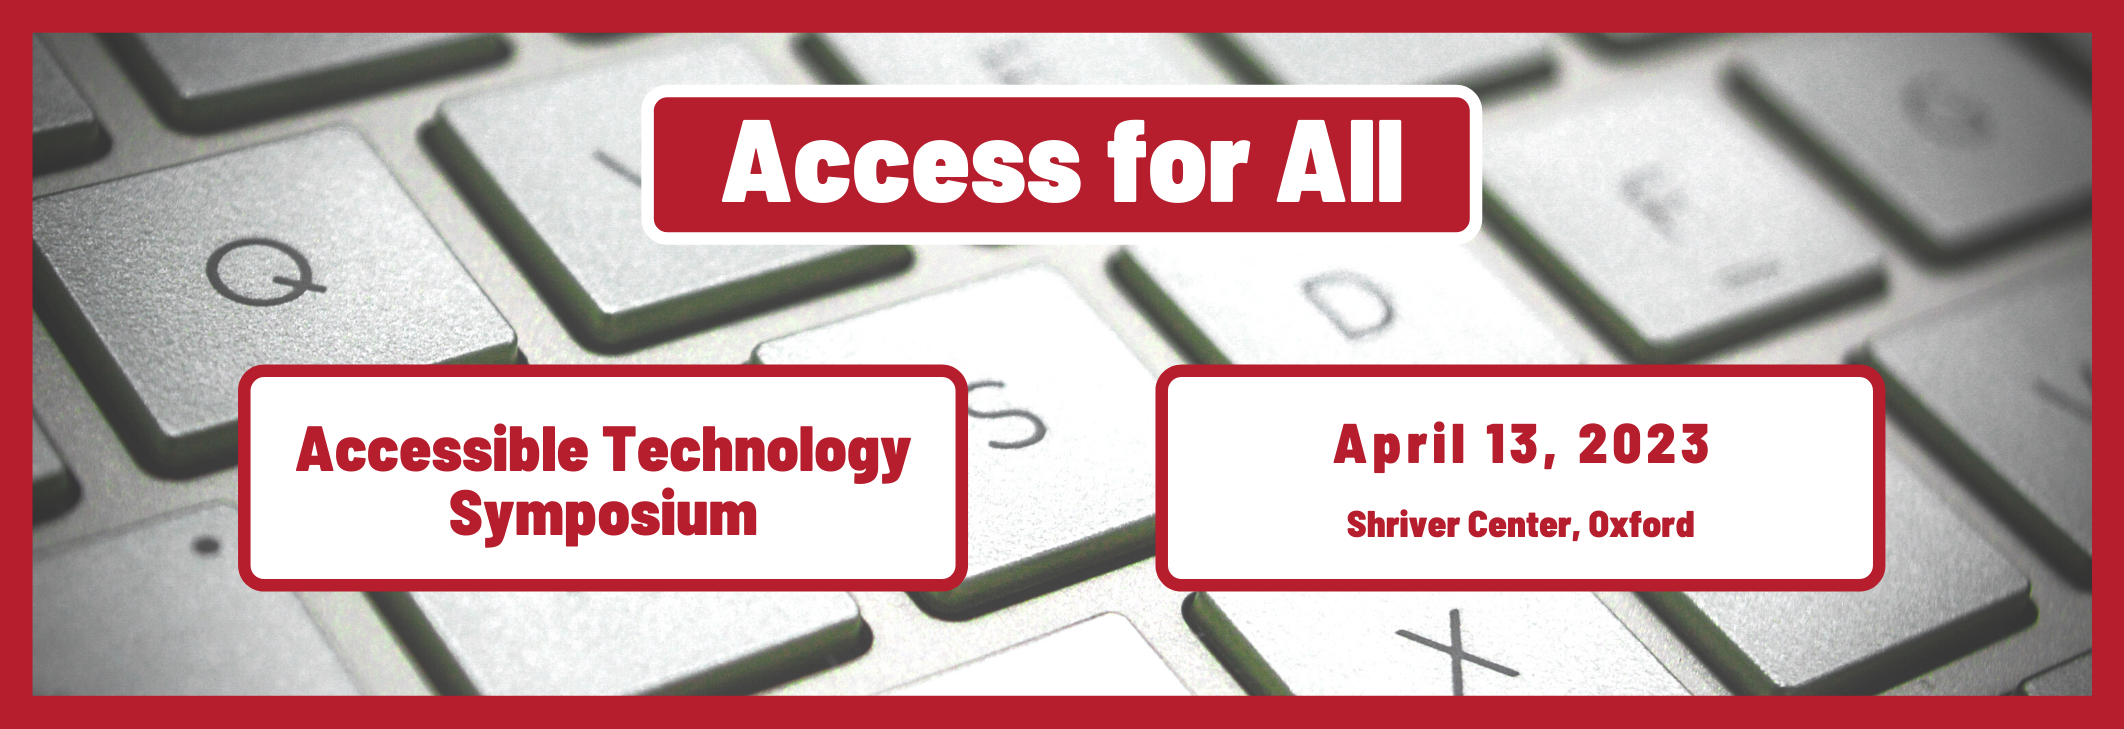 Access for all Accessible technology symposium April 13, 2023 Shriver Center